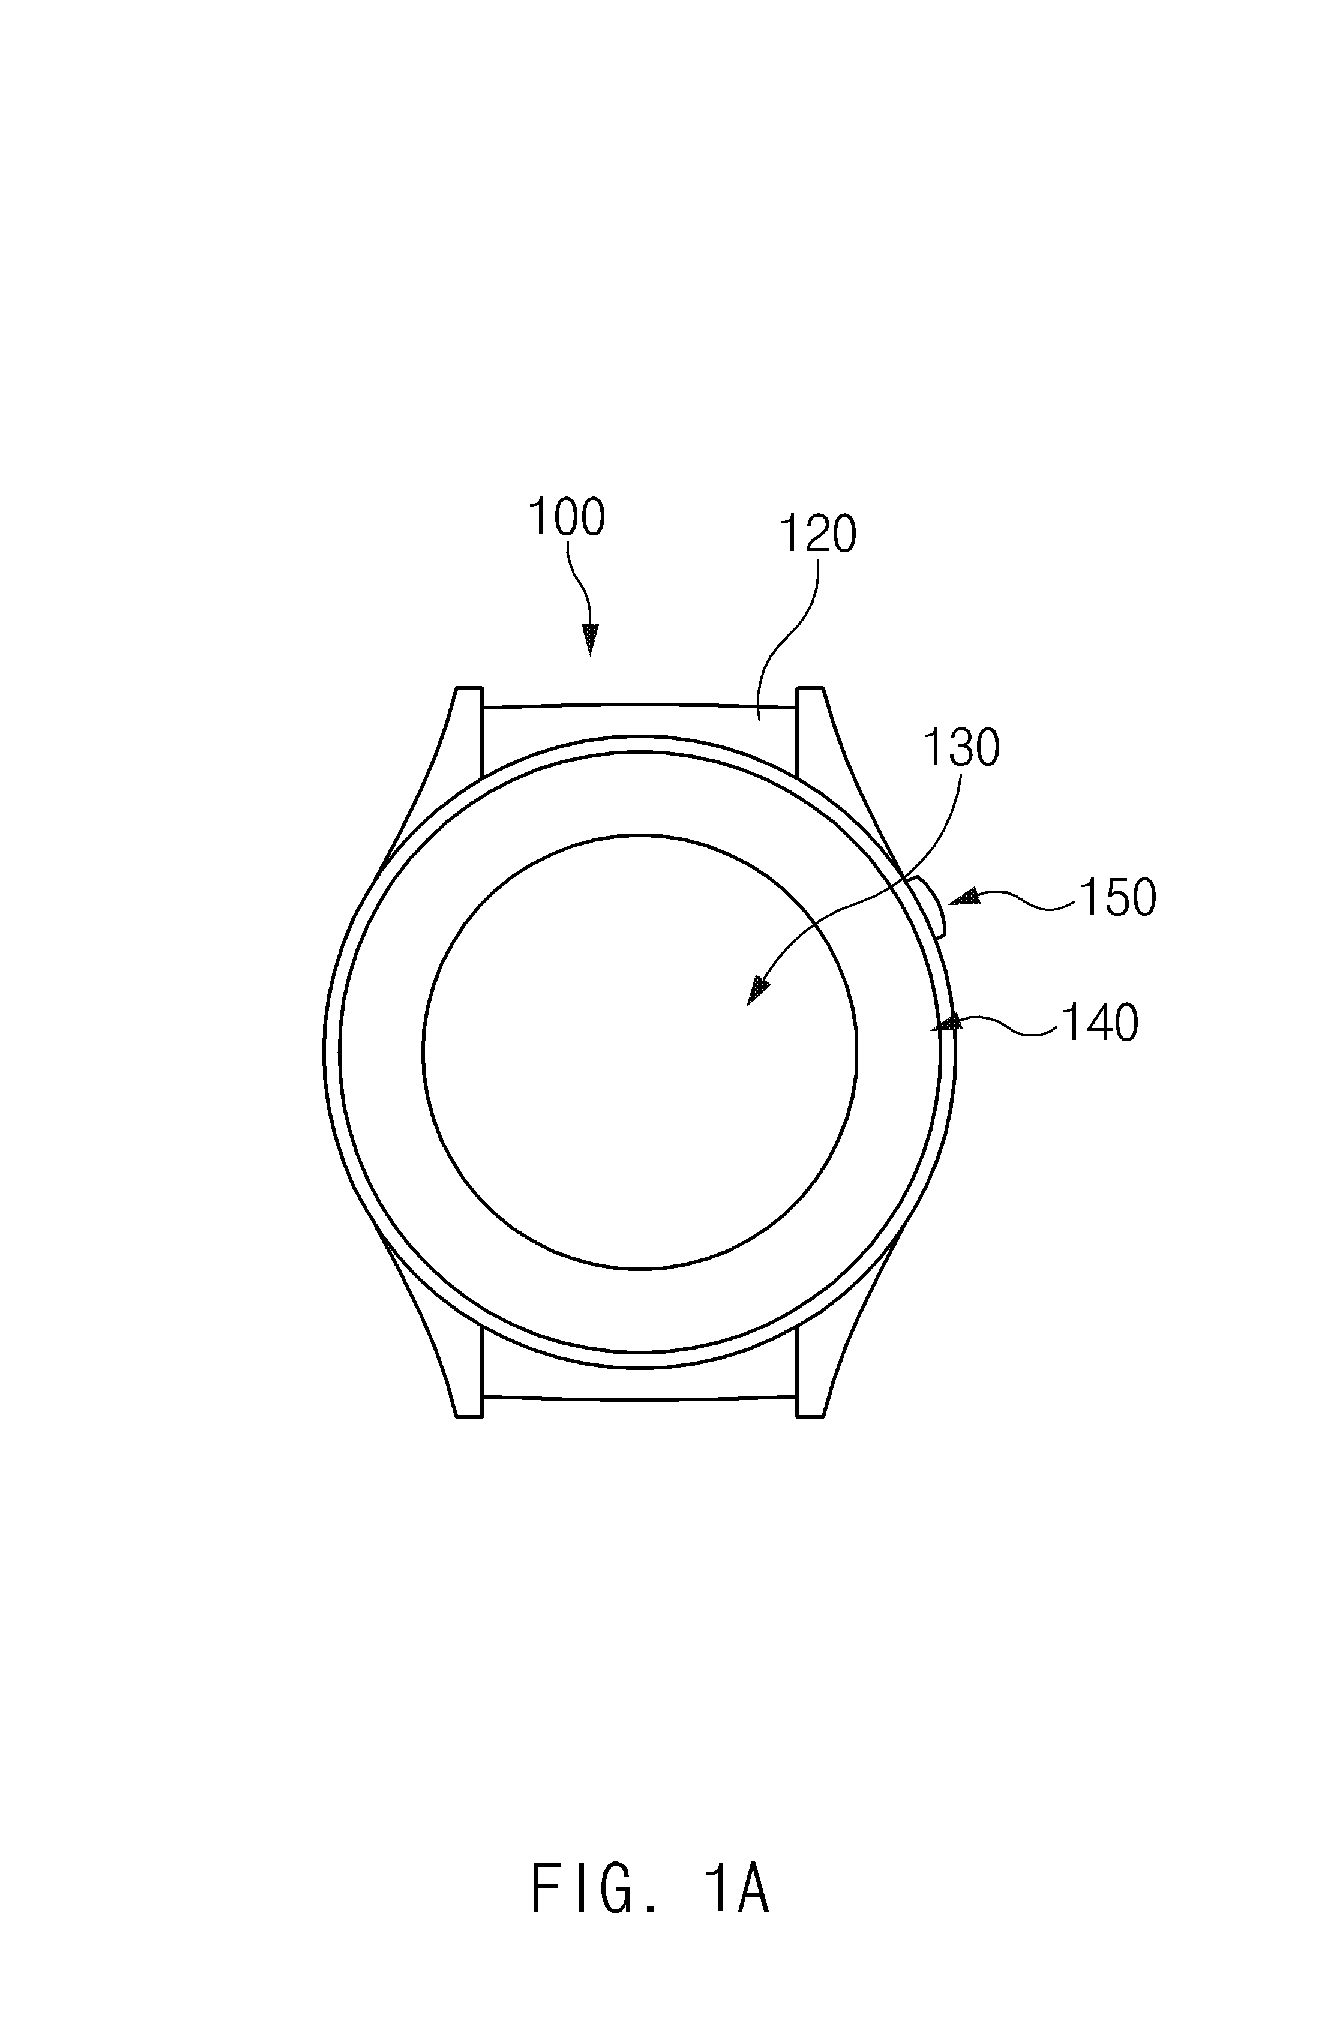 Wearable electronic device including communication circuit